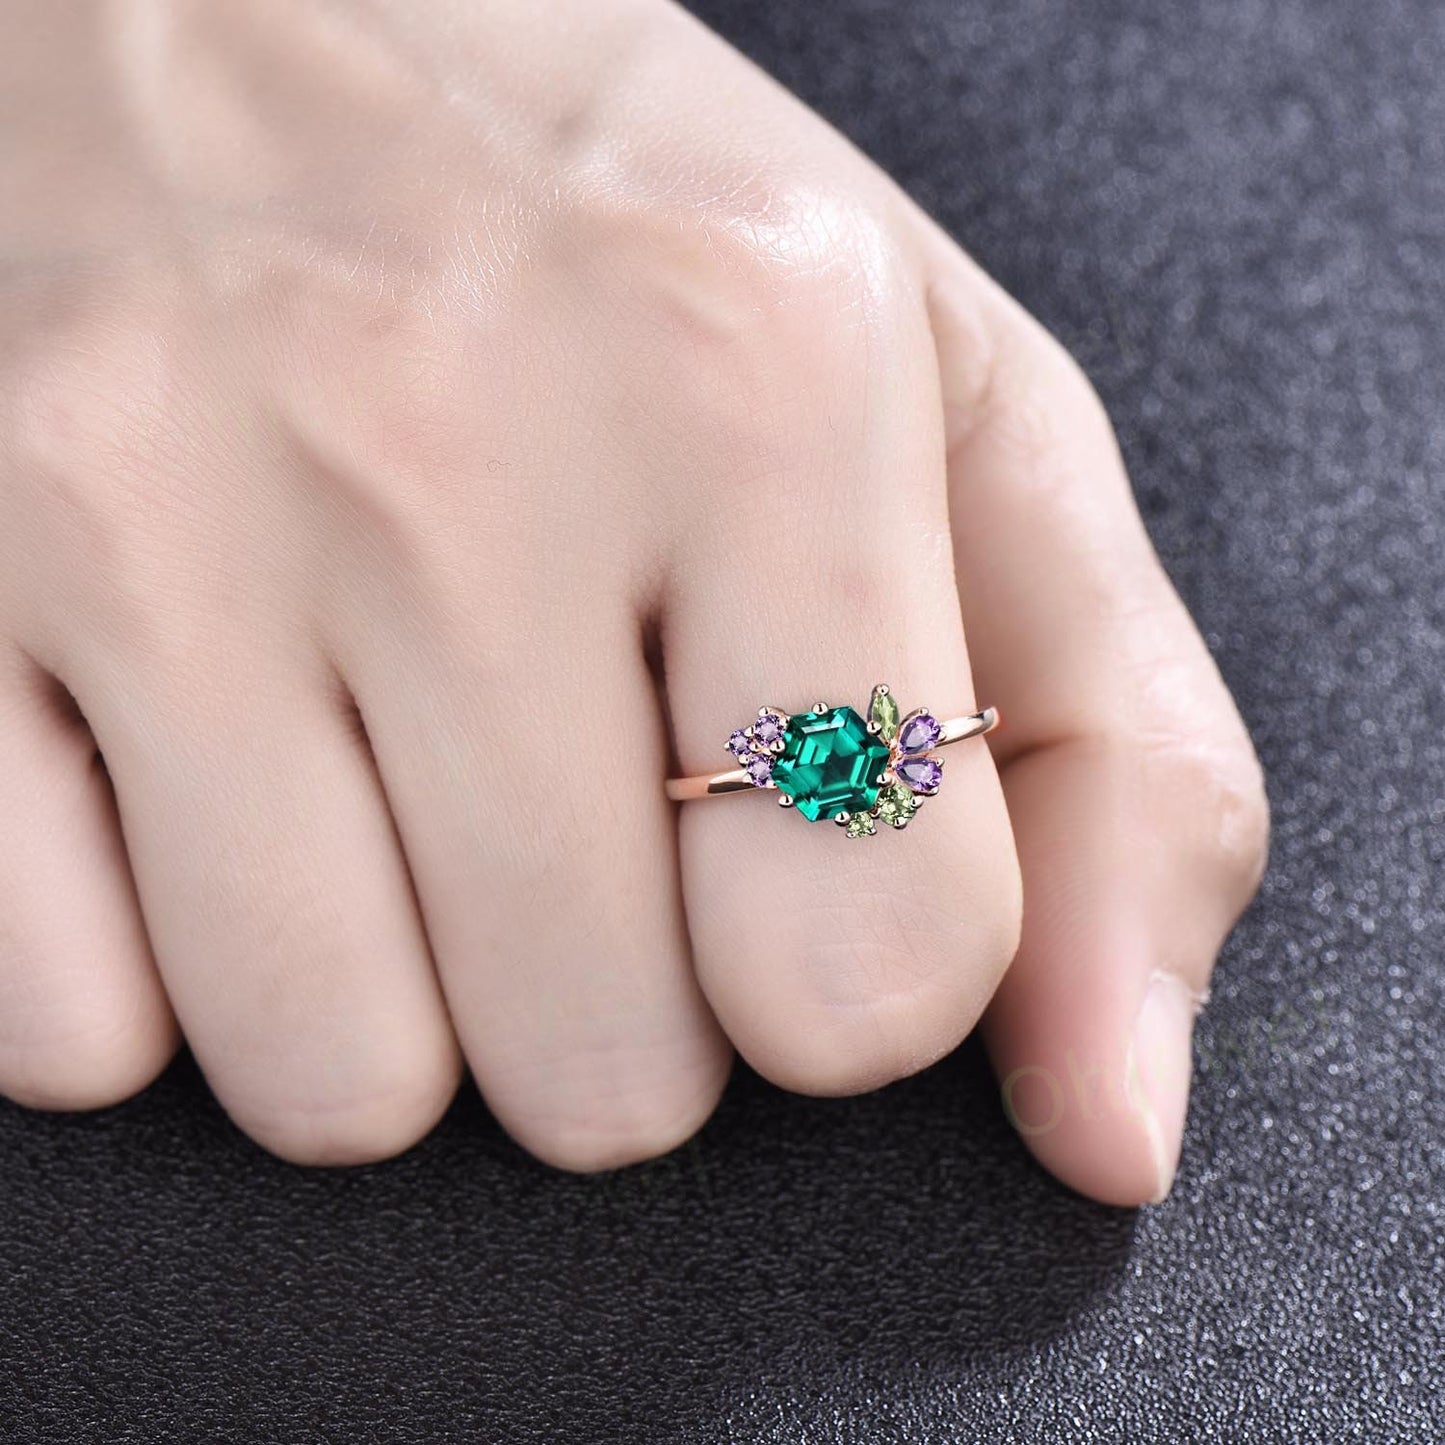 Hexagon cut emerald ring gold cluster peridot amethyst ring women vintage dainty unique engagement ring gemstone May birthstone ring gift